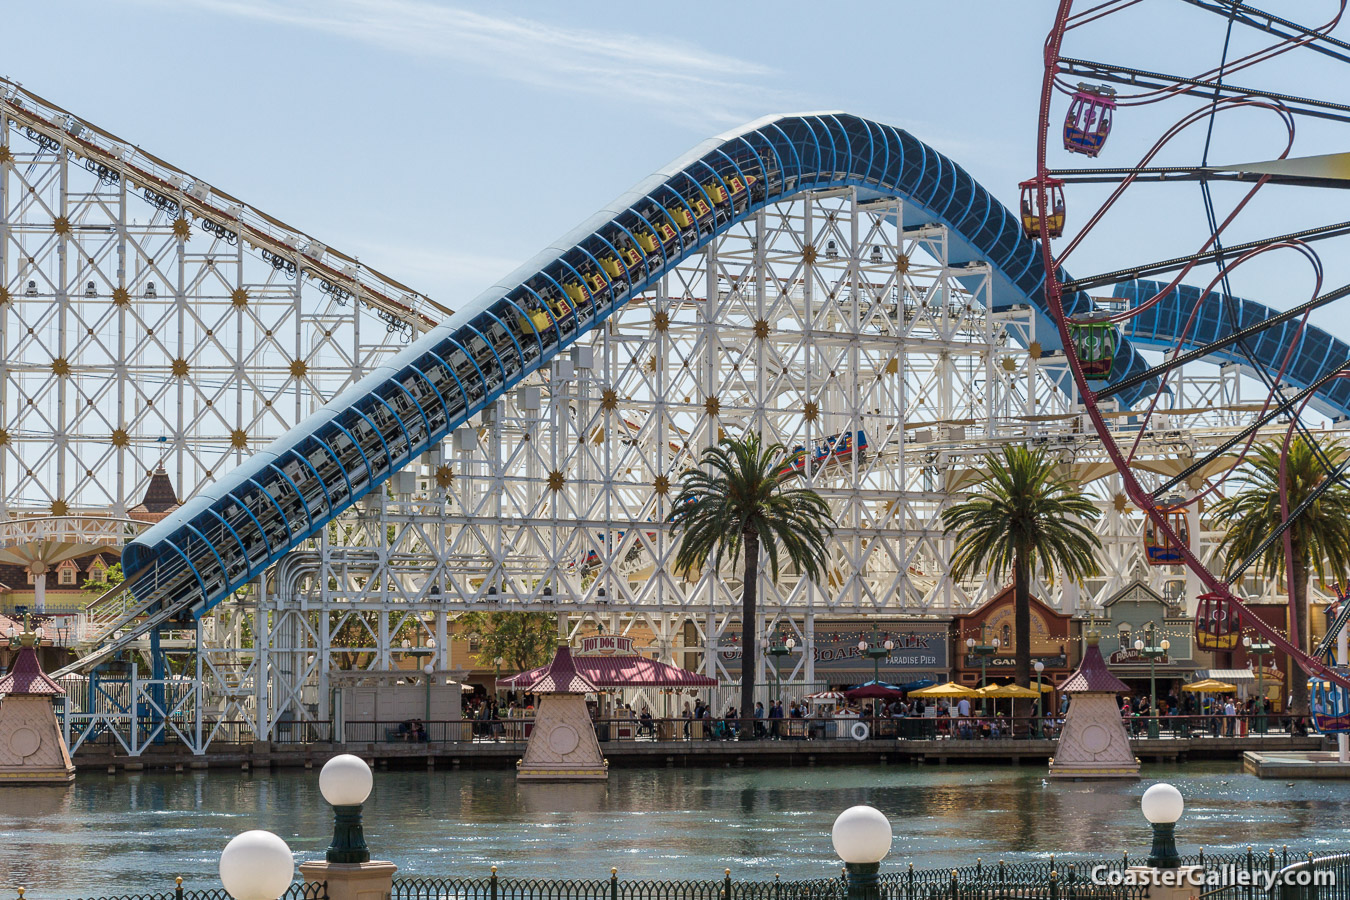 Pictures of the scary roller coaster at Disney's California Adventure Park